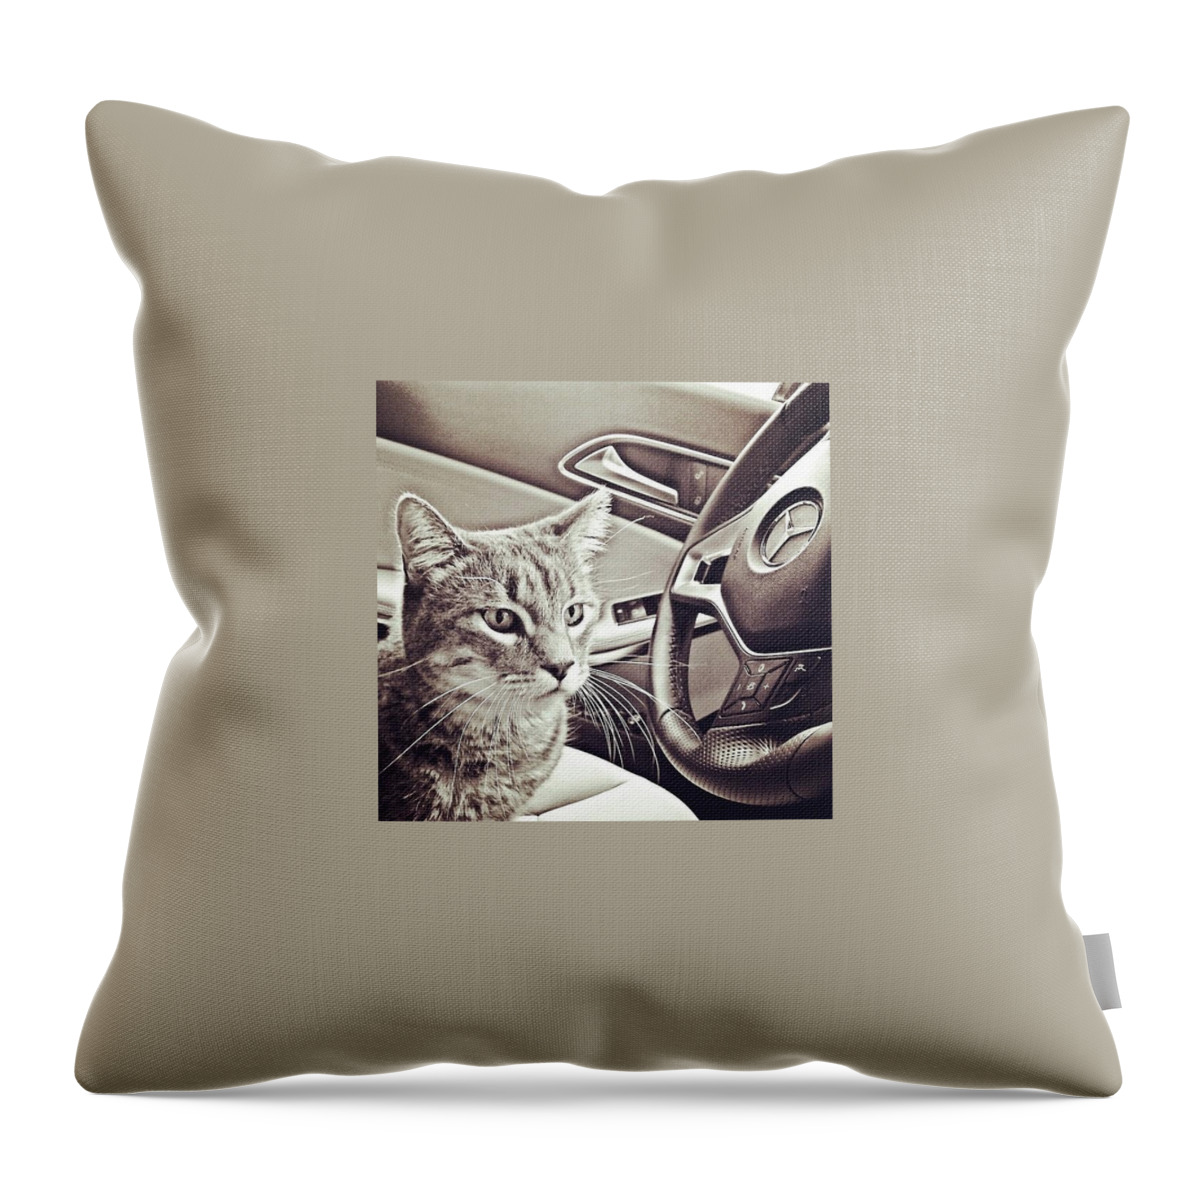 Beautiful Throw Pillow featuring the photograph Smokey Loves The Mercedes Cla Too! by Austin Tuxedo Cat